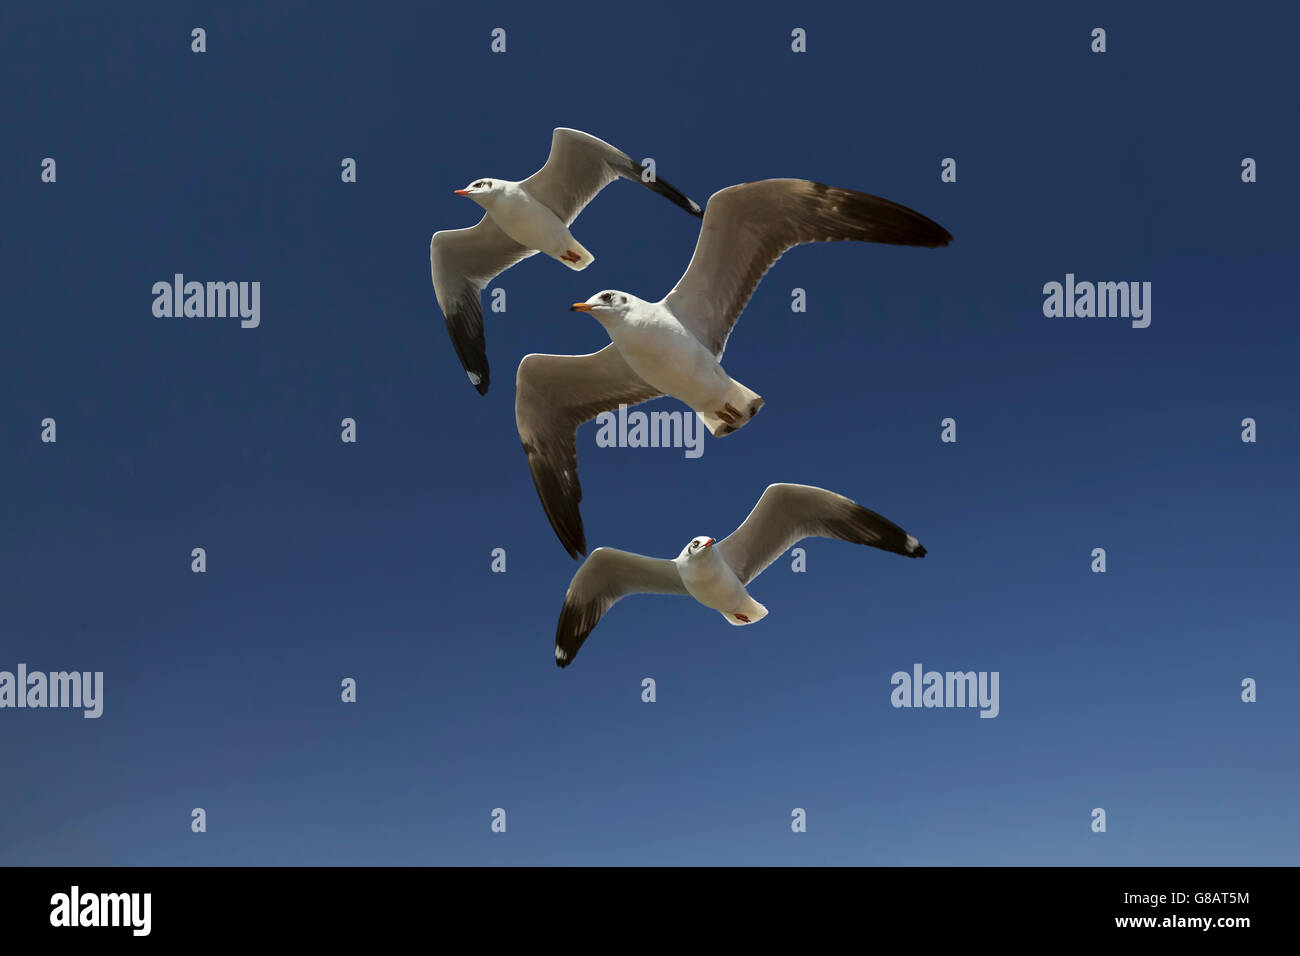 Three seagulls flying in a row, myanmar Stock Photo